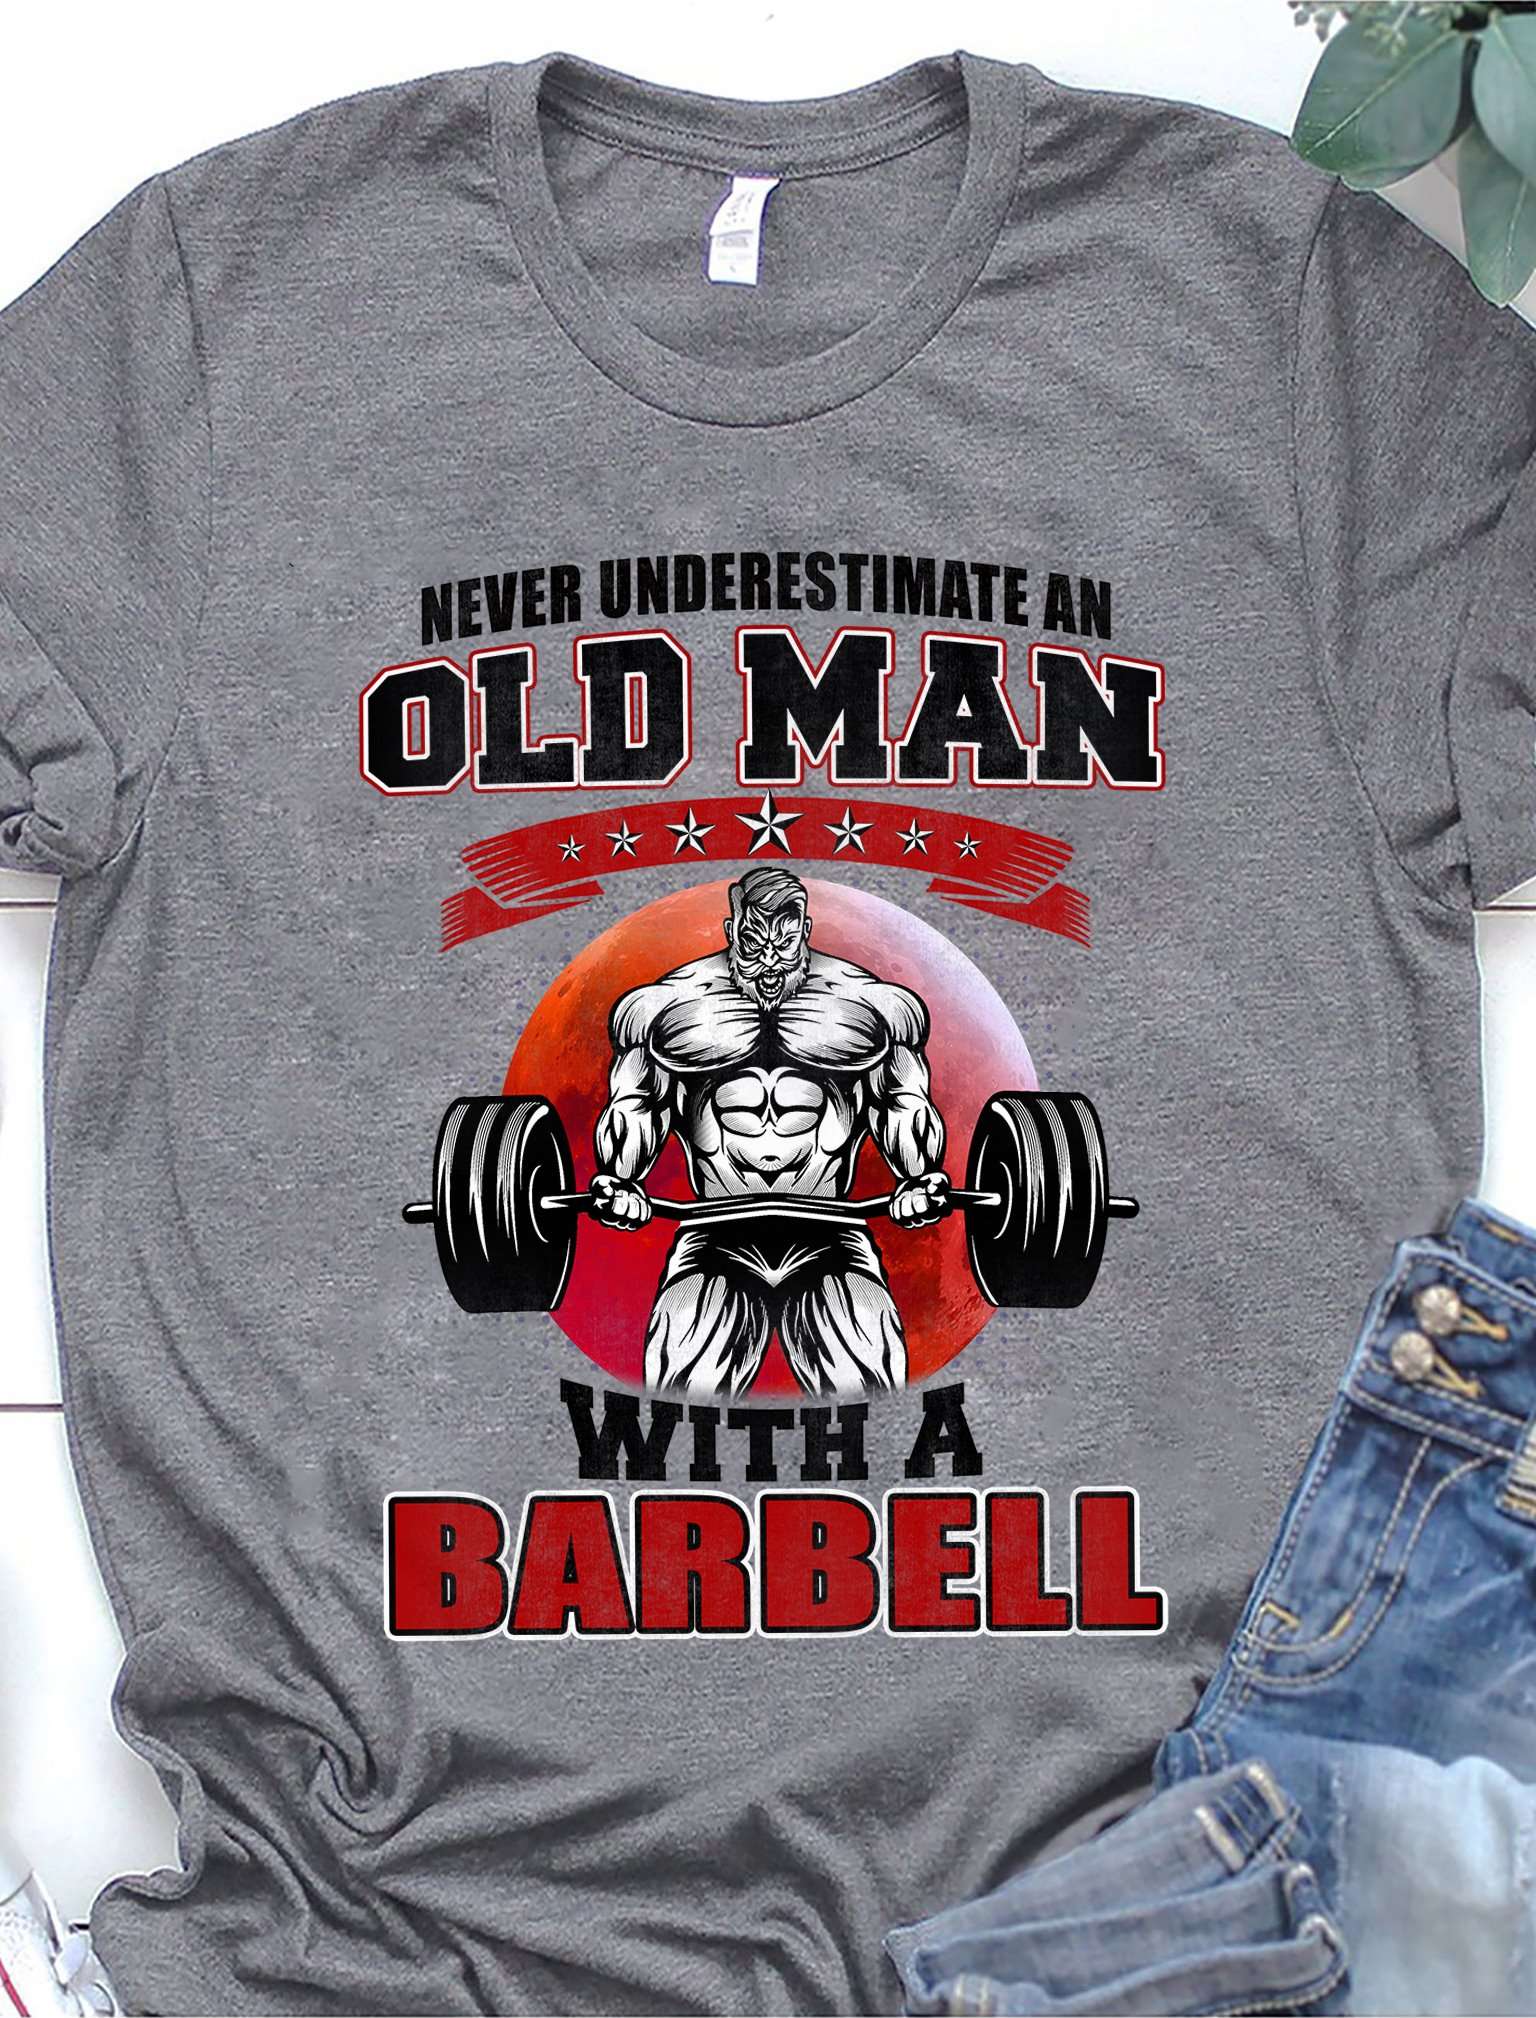 Barbell Man - Never underestimate old man with a barbell